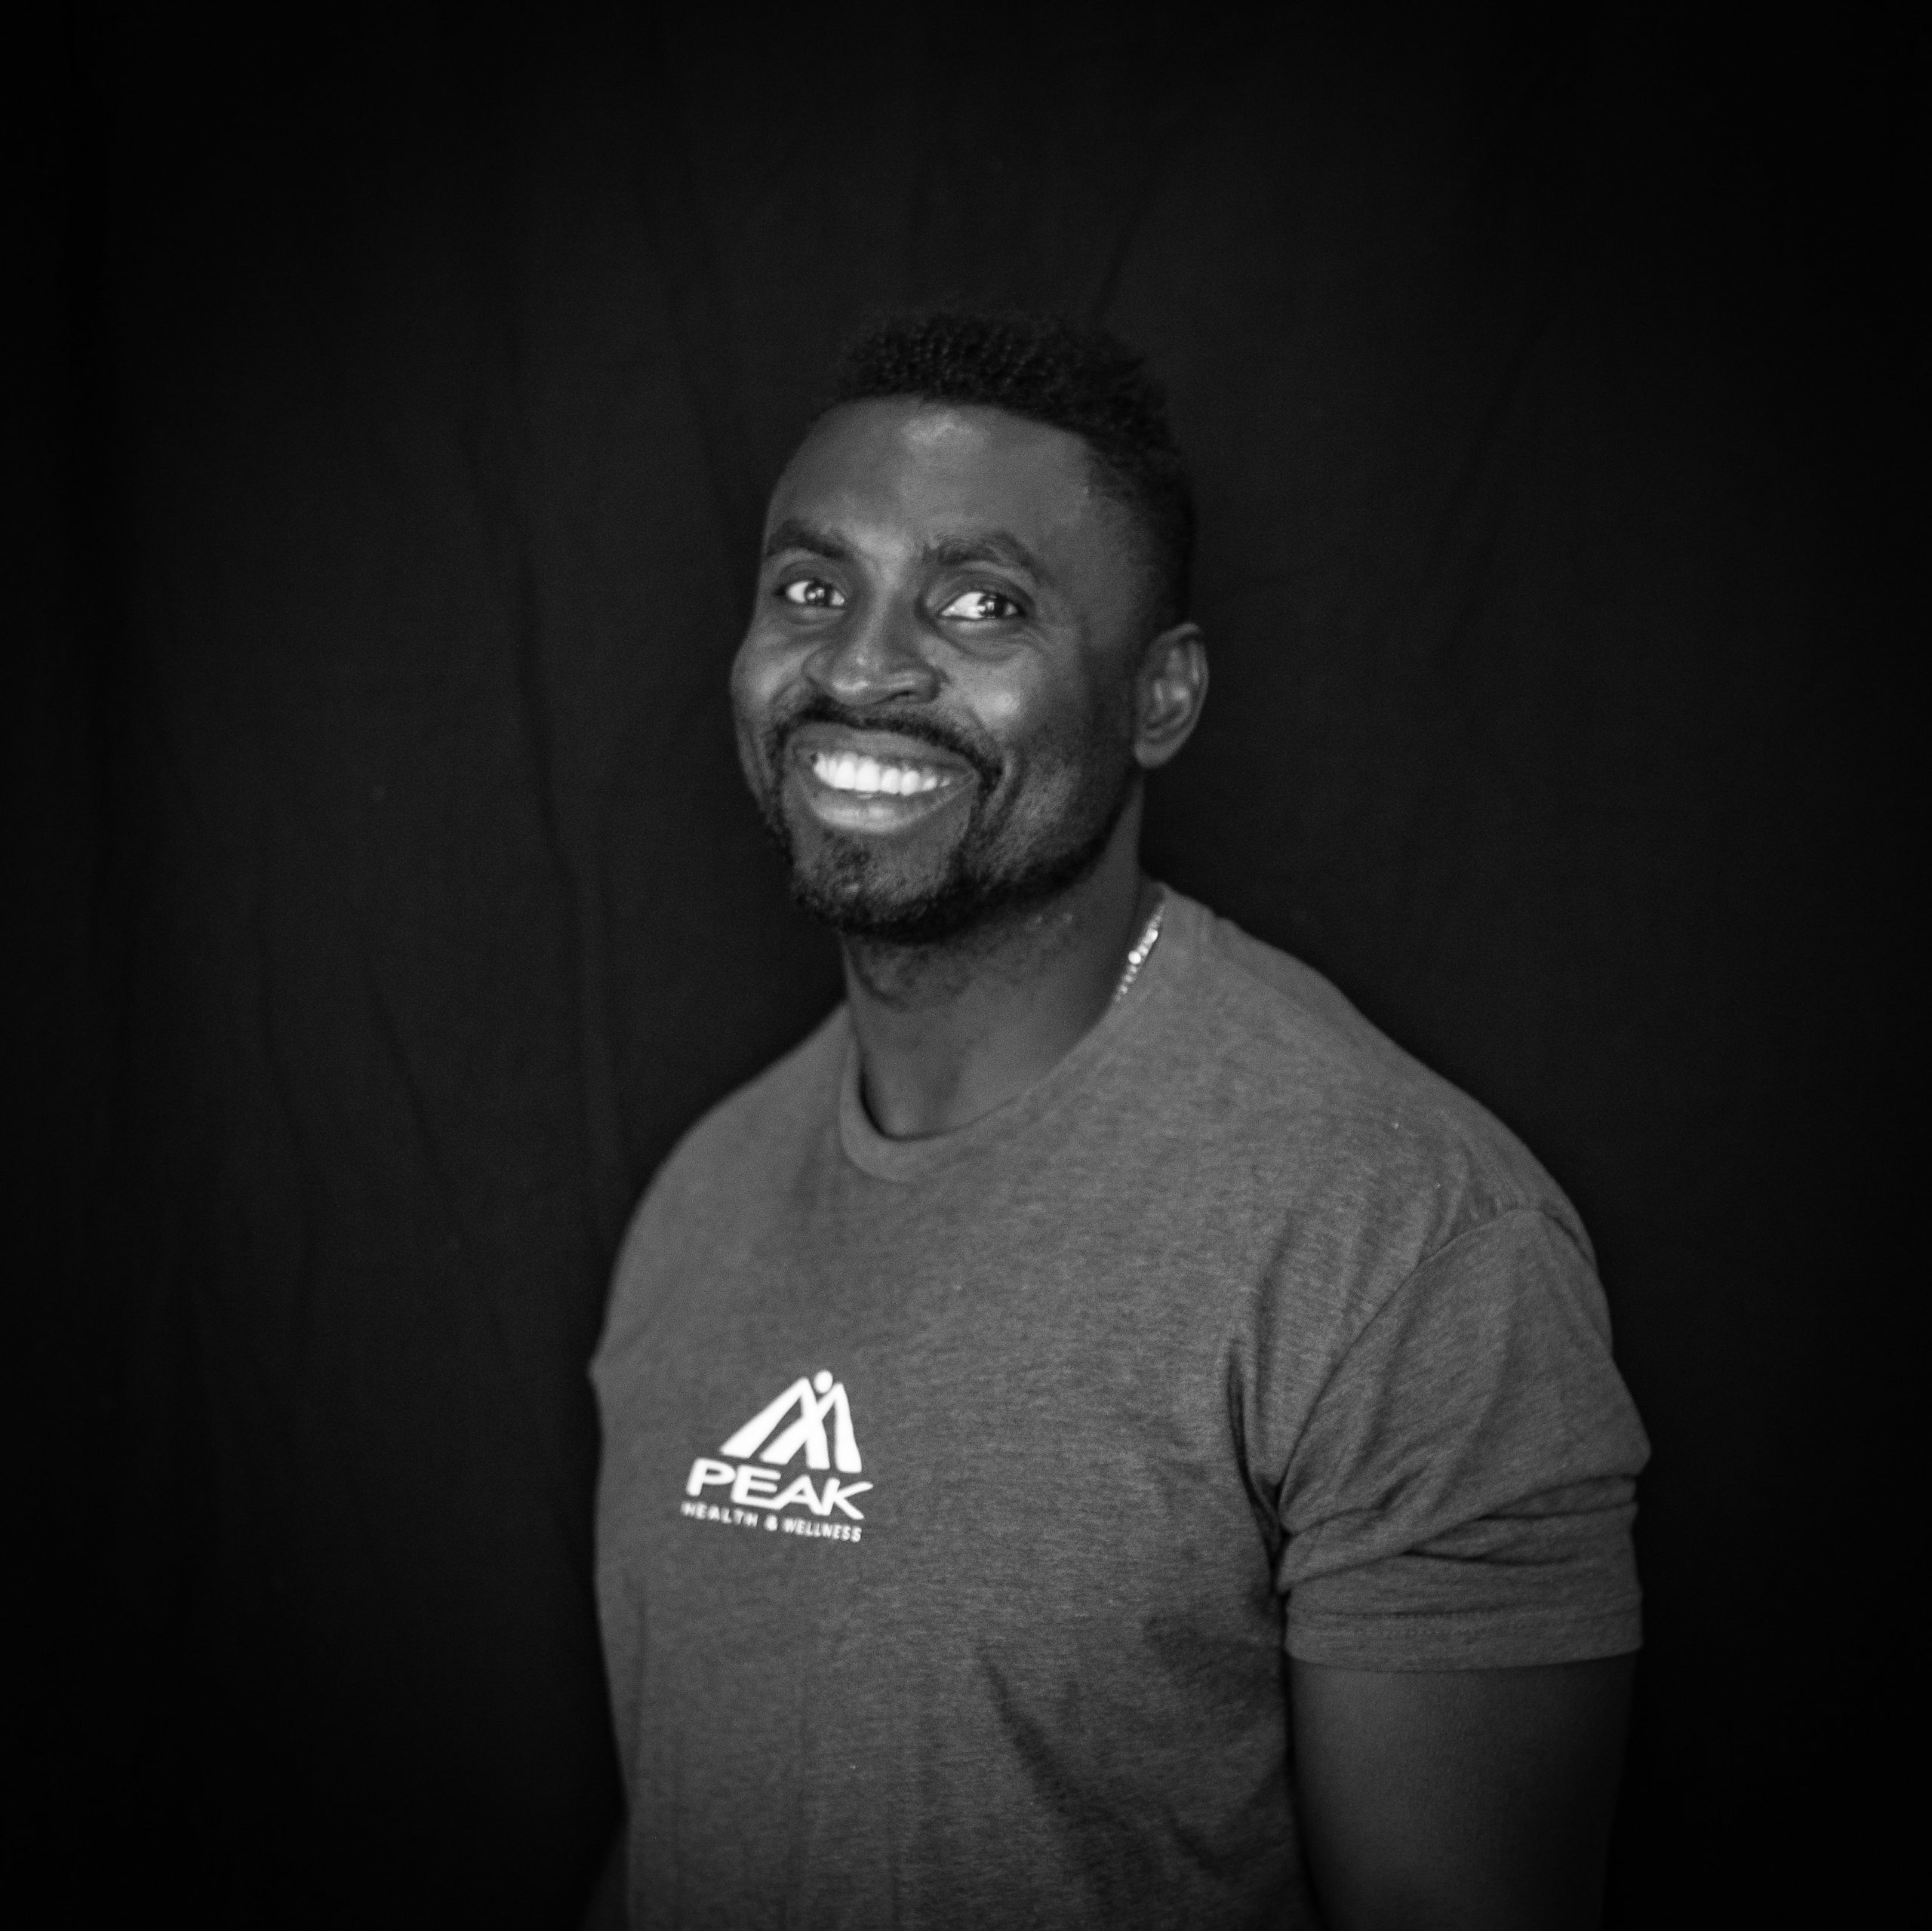 A picture of peak health gym in Missoula personal trainer Gabe Ansah